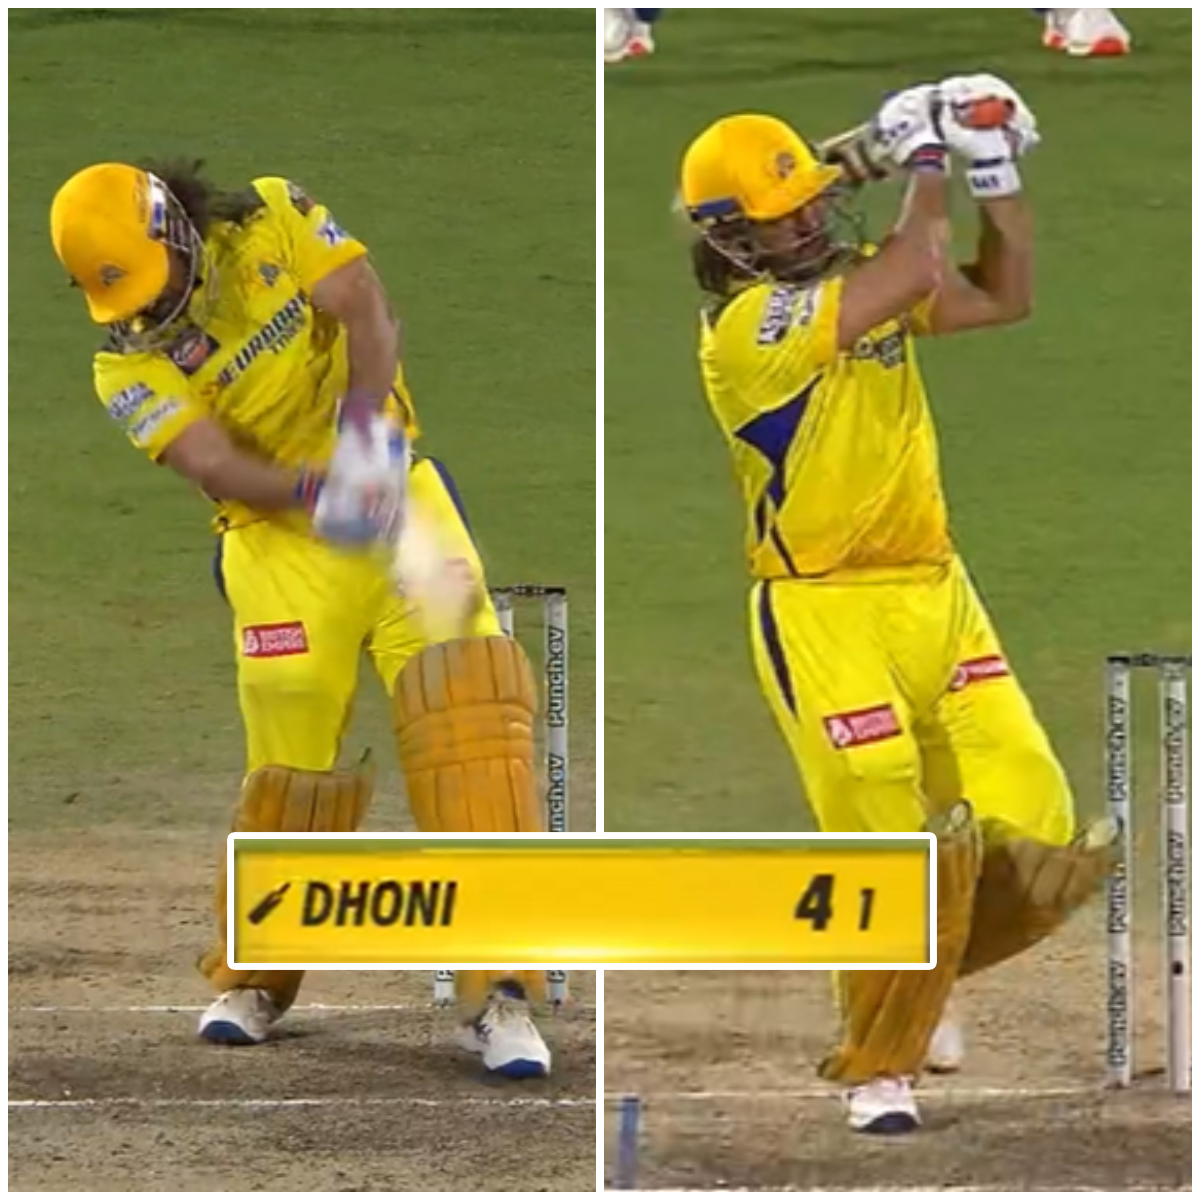 Comes in for one ball, hits a boundary, and goes off!

Another day, MS Dhoni finishes the innings with a boundary👏

📷: Jio Cinema

#MSDhoni #MahendraSinghDhoni #CSKvLSG #CSKvsLSG #IPL #IPL2024 #Cricket #SBM